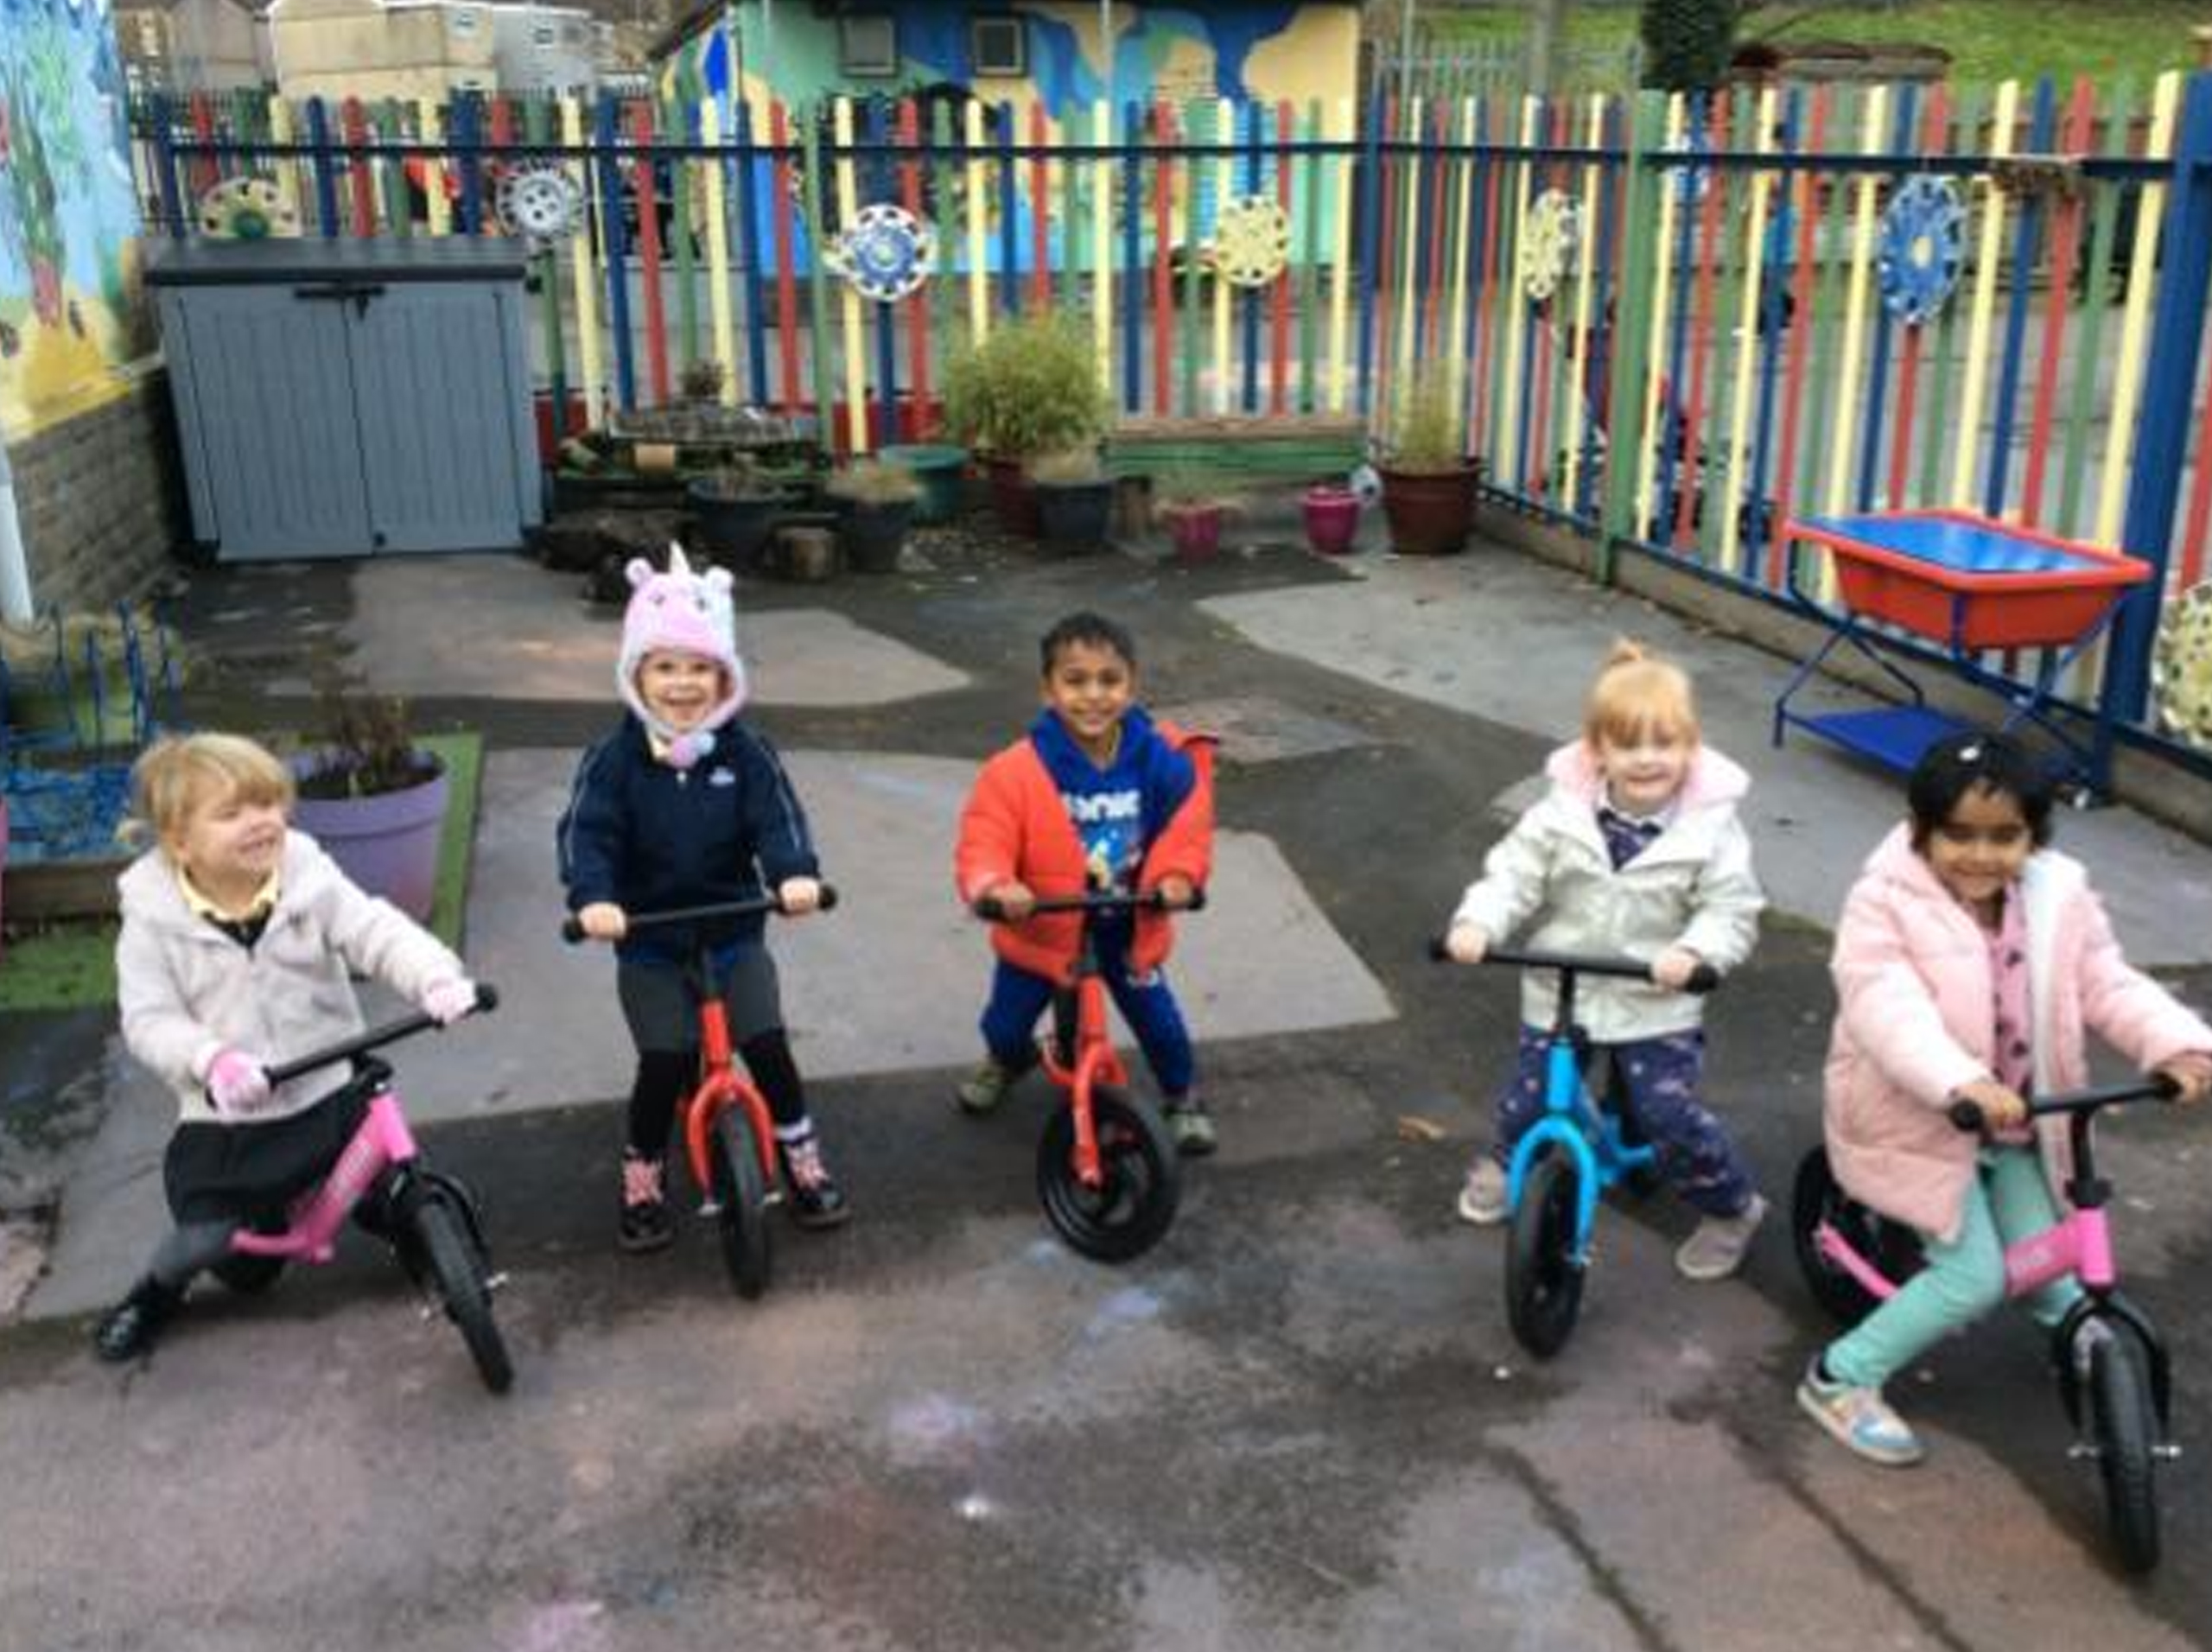 New balance bikes and art stationery for Morriston Primary School